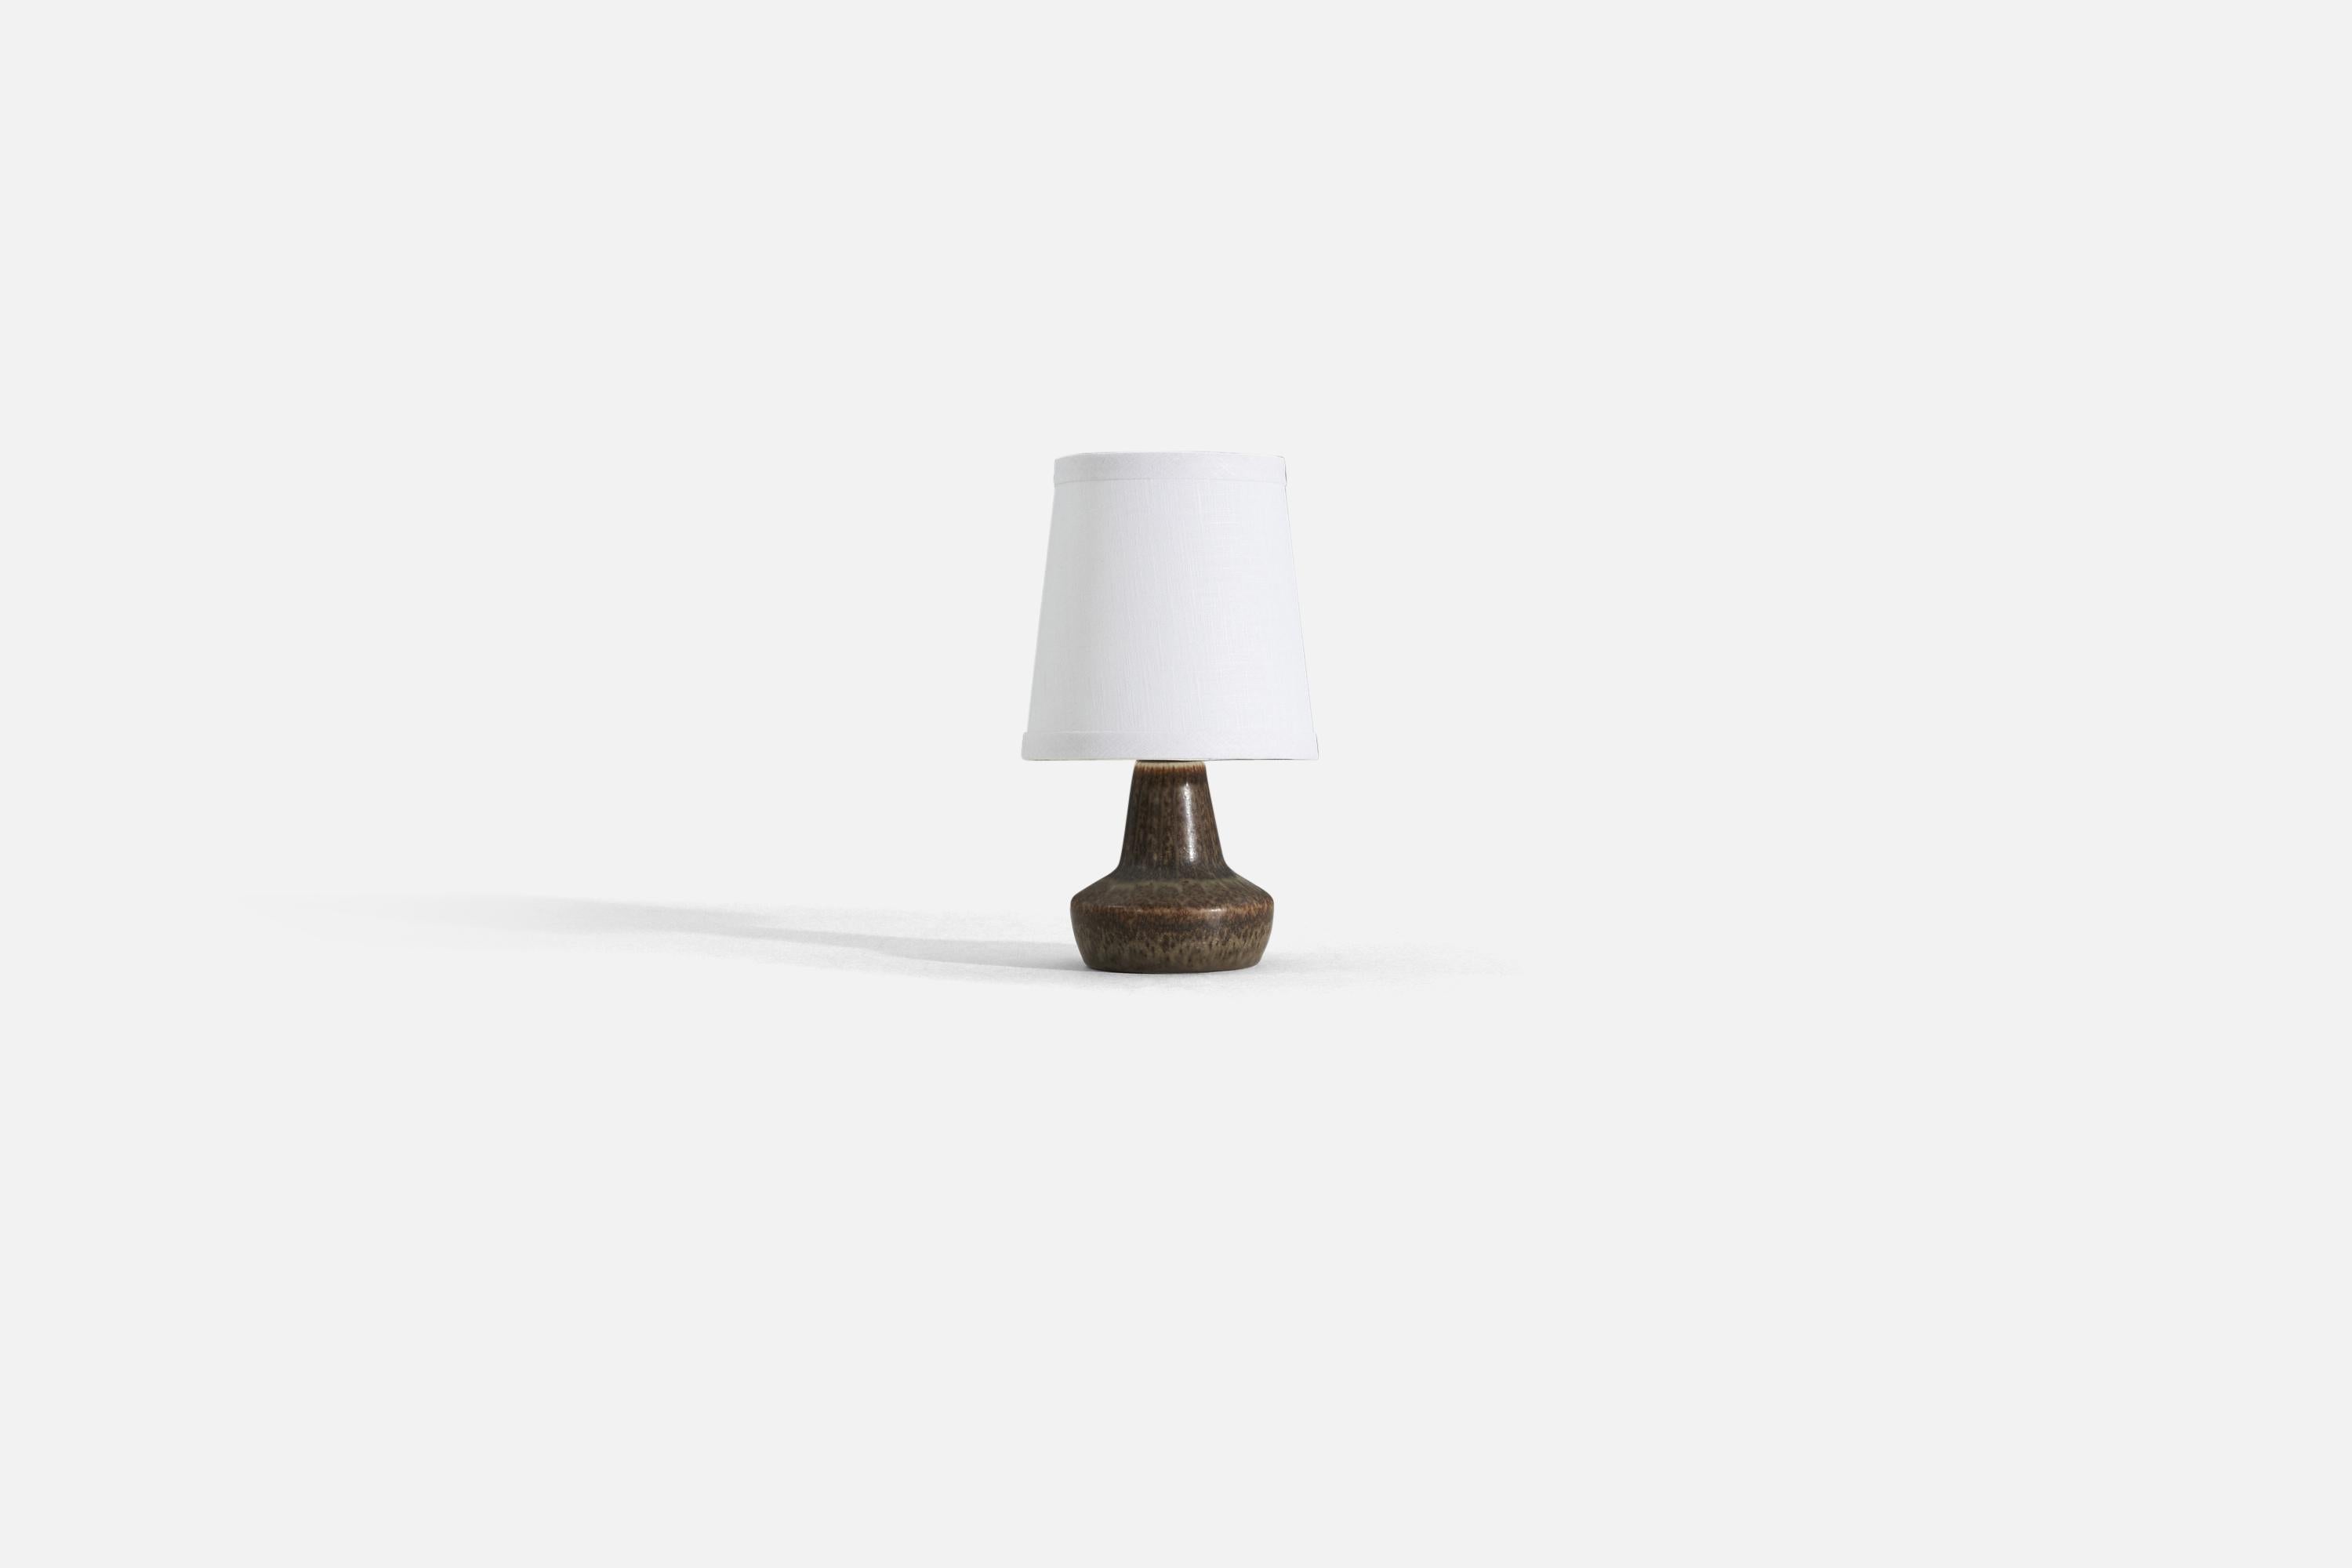 A brown glazed stoneware table lamp produced by Rörstrand, Sweden, 1950s. Designed by Gunnar Nylund, (Swedish, 1914-1997). 

Sold without lampshade. Stated dimensions exclude lampshade, height includes socket.

For reference:

Shade : 4.5 x 6